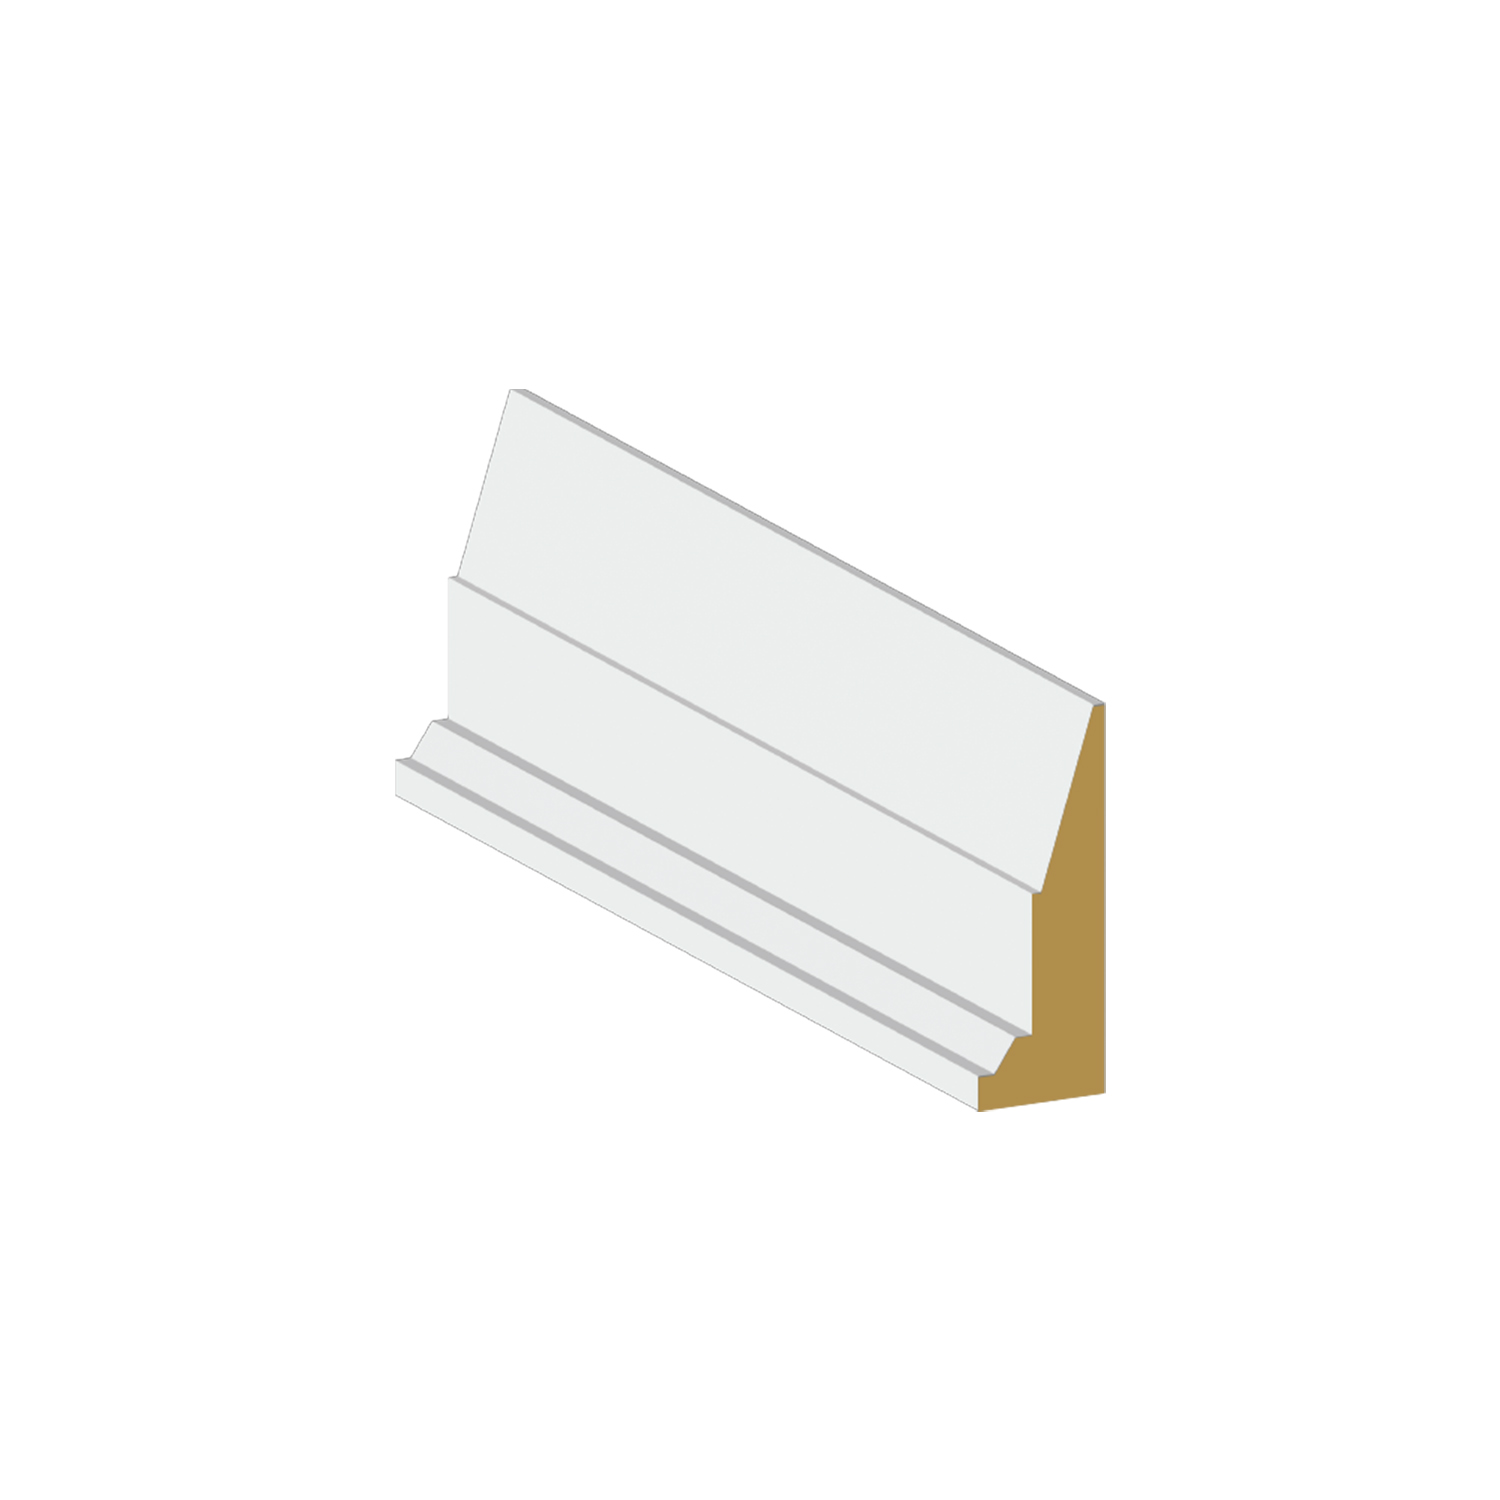 Casing MDF Step Bevel Back Band 3 1/2 x 1 1/8 x 8 1/2'' - $1.76/LF - SOLD PER PIECE - EACH PIECE IS 8 1/2' - $15.00 EACH